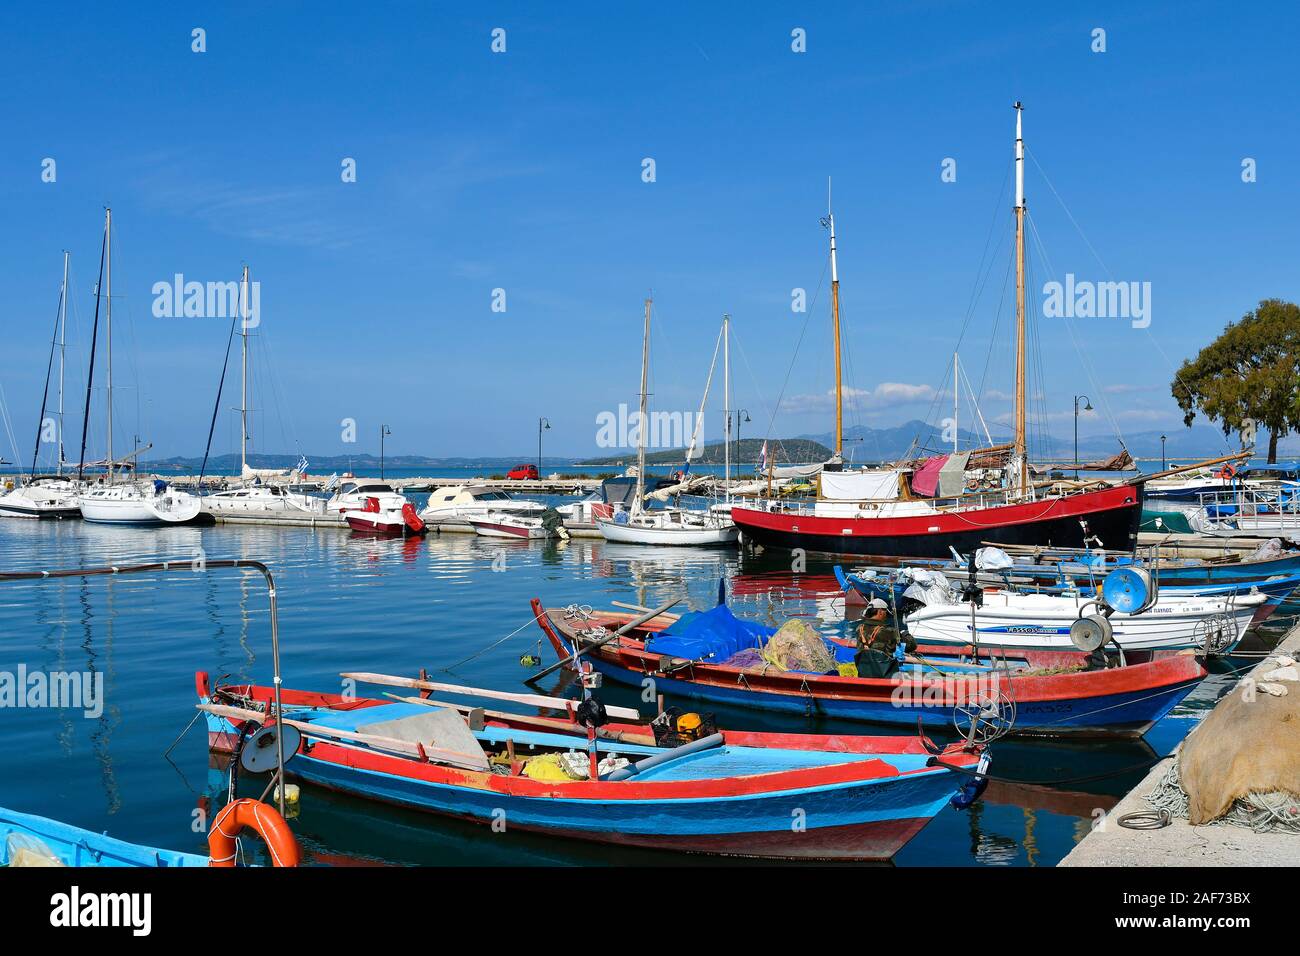 Greece, Epirus, ships and yachts in the harbor of Koronissia village situated in Ambracian Gulf Stock Photo